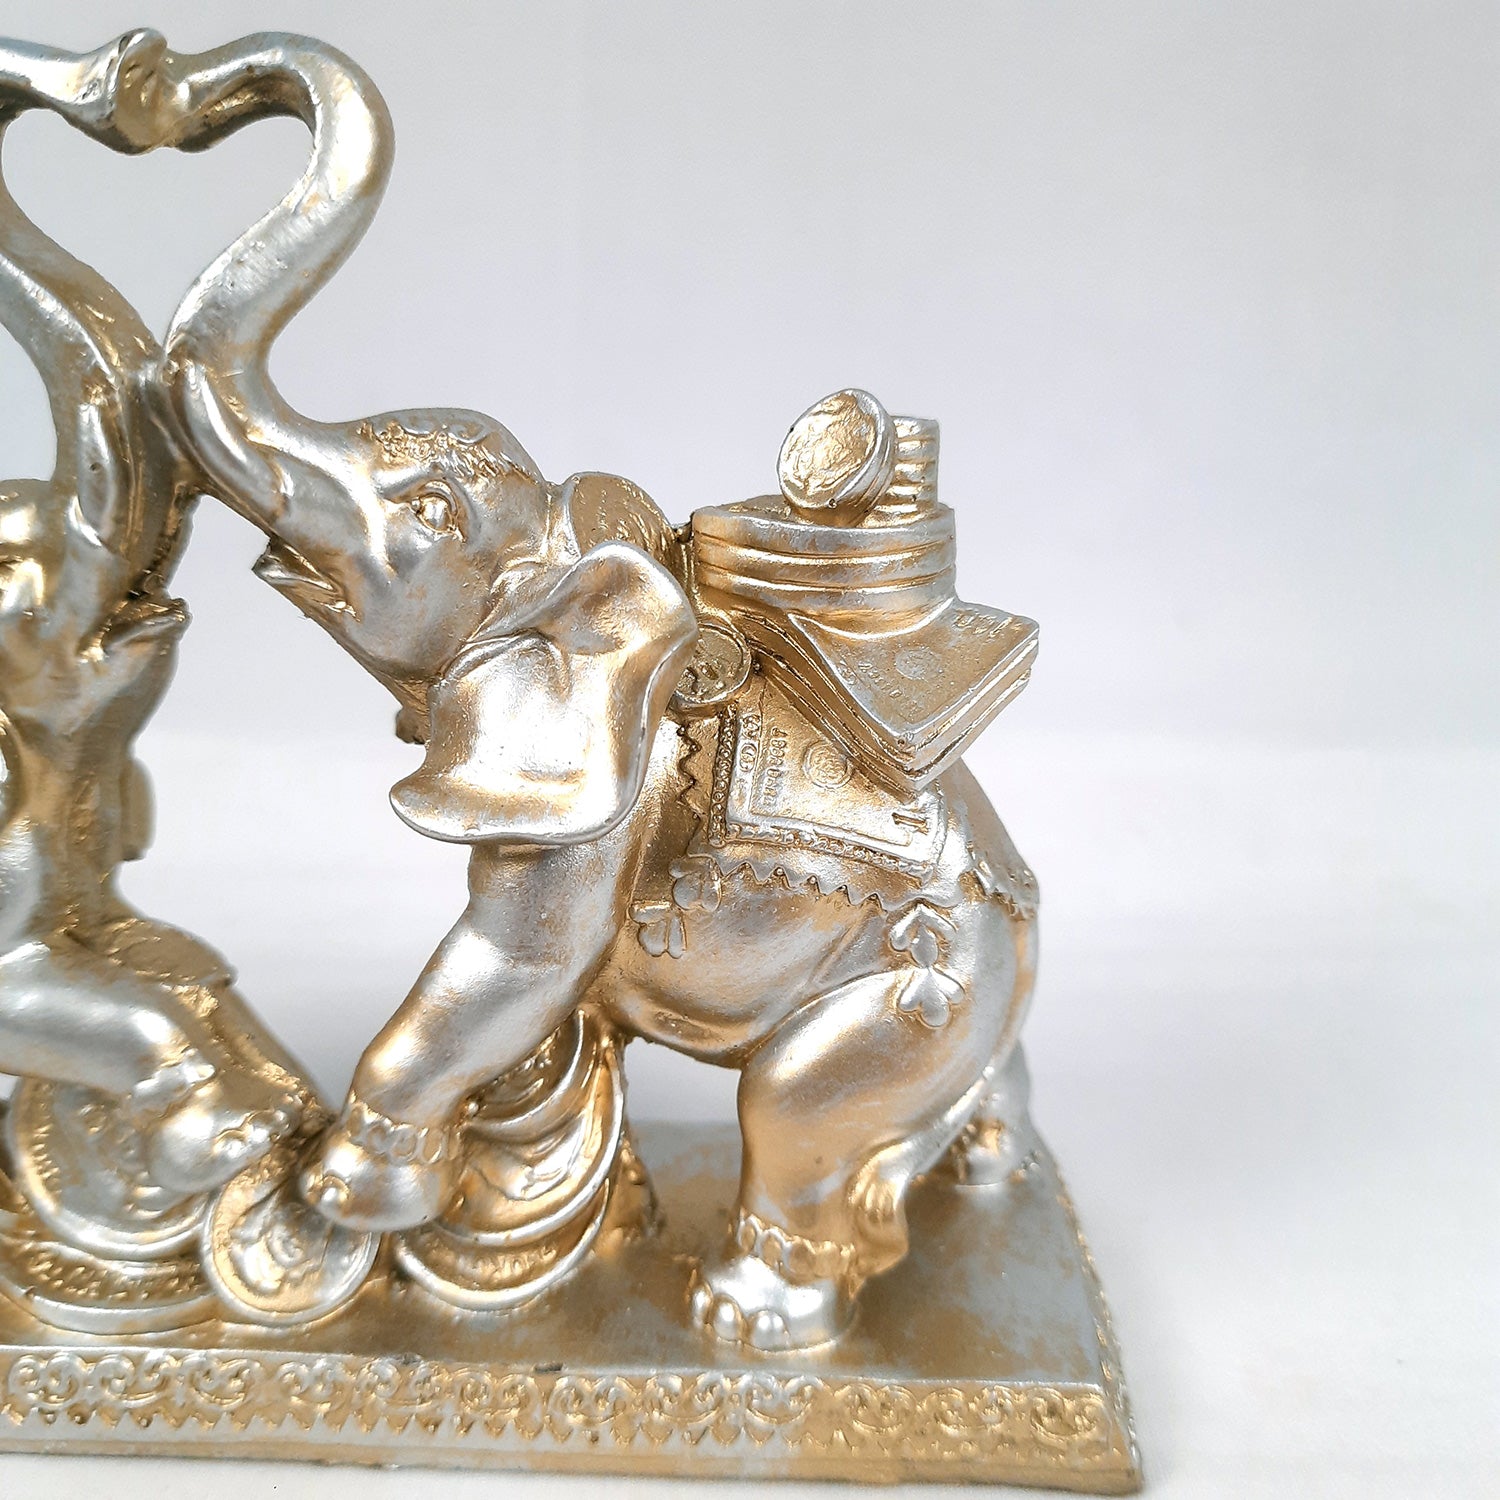 Elephant Statue Showpiece | Fengshui Trunk Up Elephant Figurine With Money & Gold Coins - For Vastu, Good Fortune, Wealth, Strength | For Home Decor, Living Room, Office & Gift - 7 inch - Apkamart